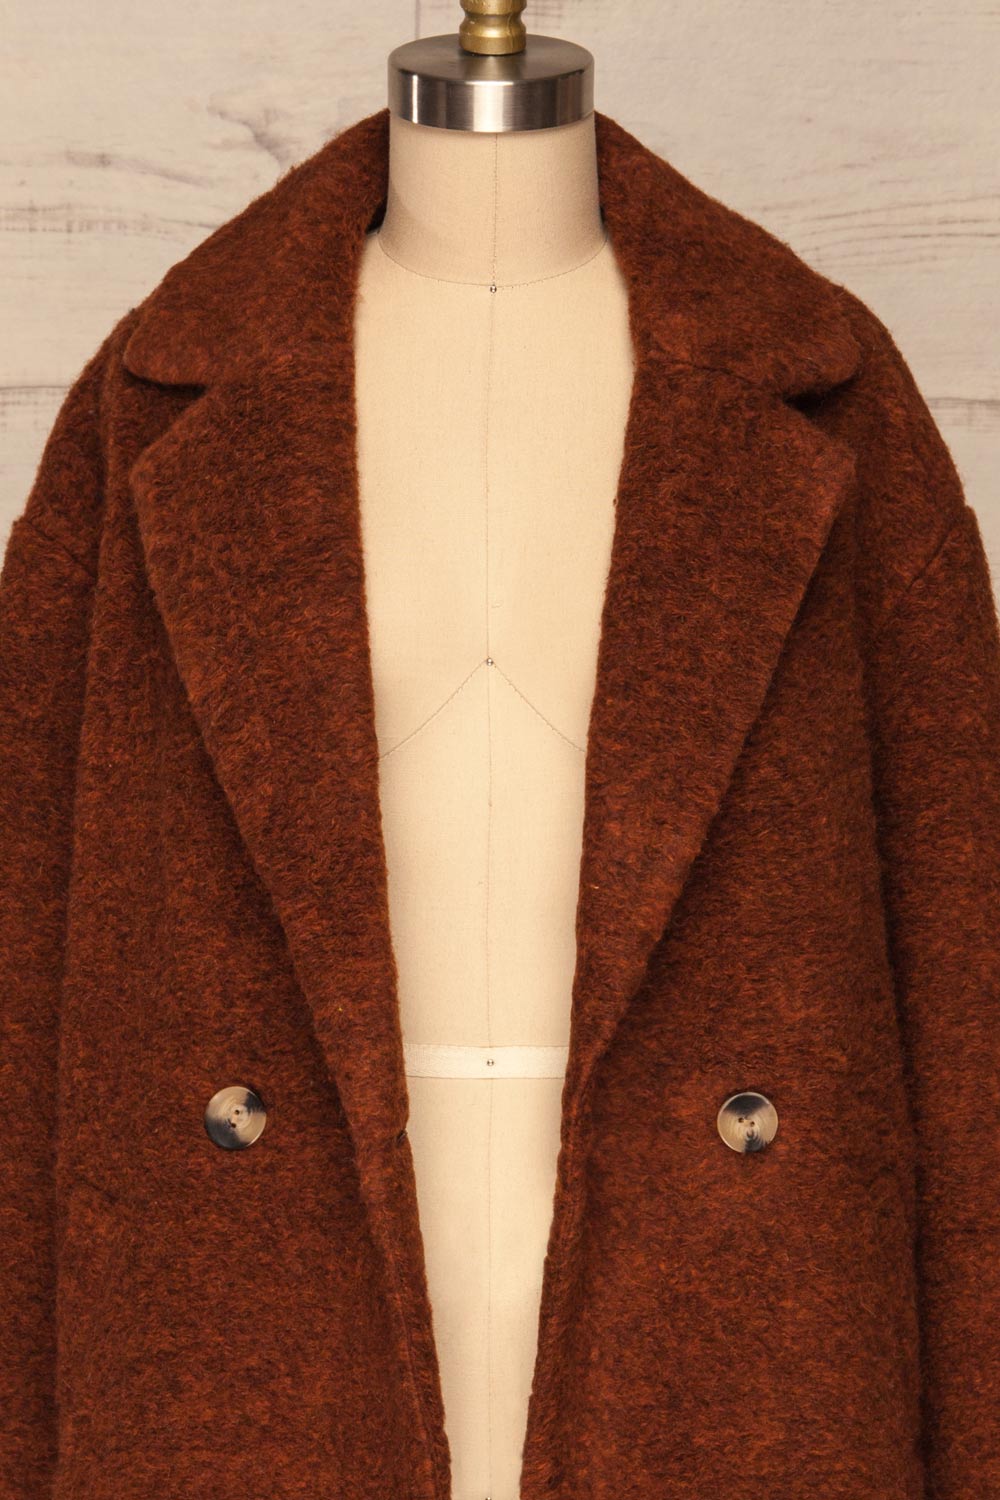 Chania Rust Brown Double Breasted Wool Coat | La Petite Garçonne front close-up open